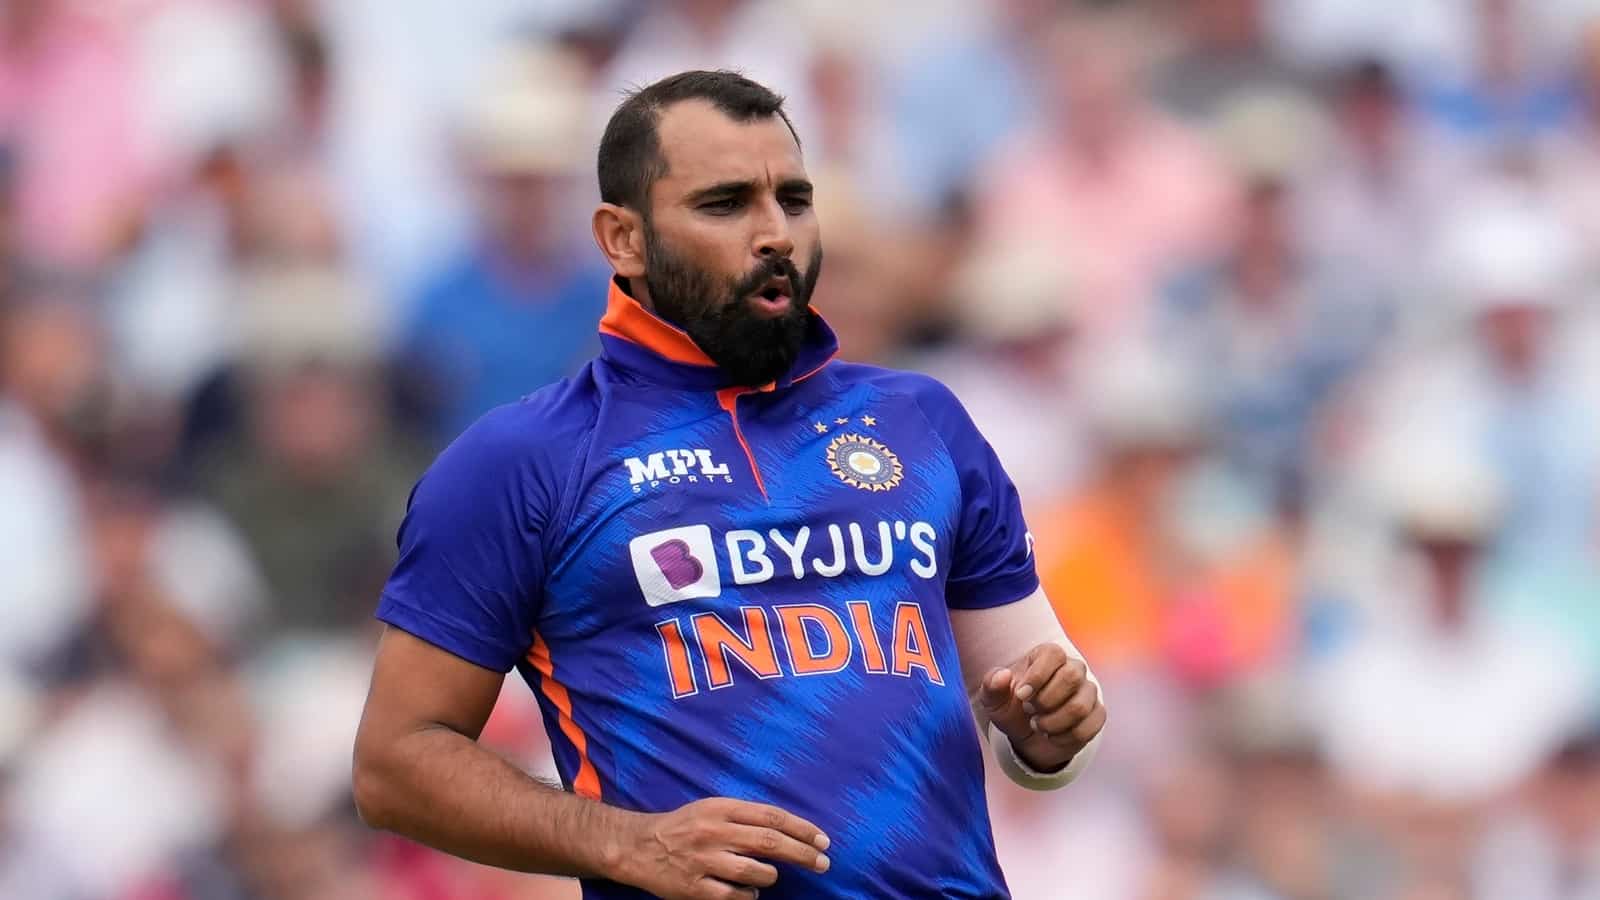 Mohammad Shami | Getty Images